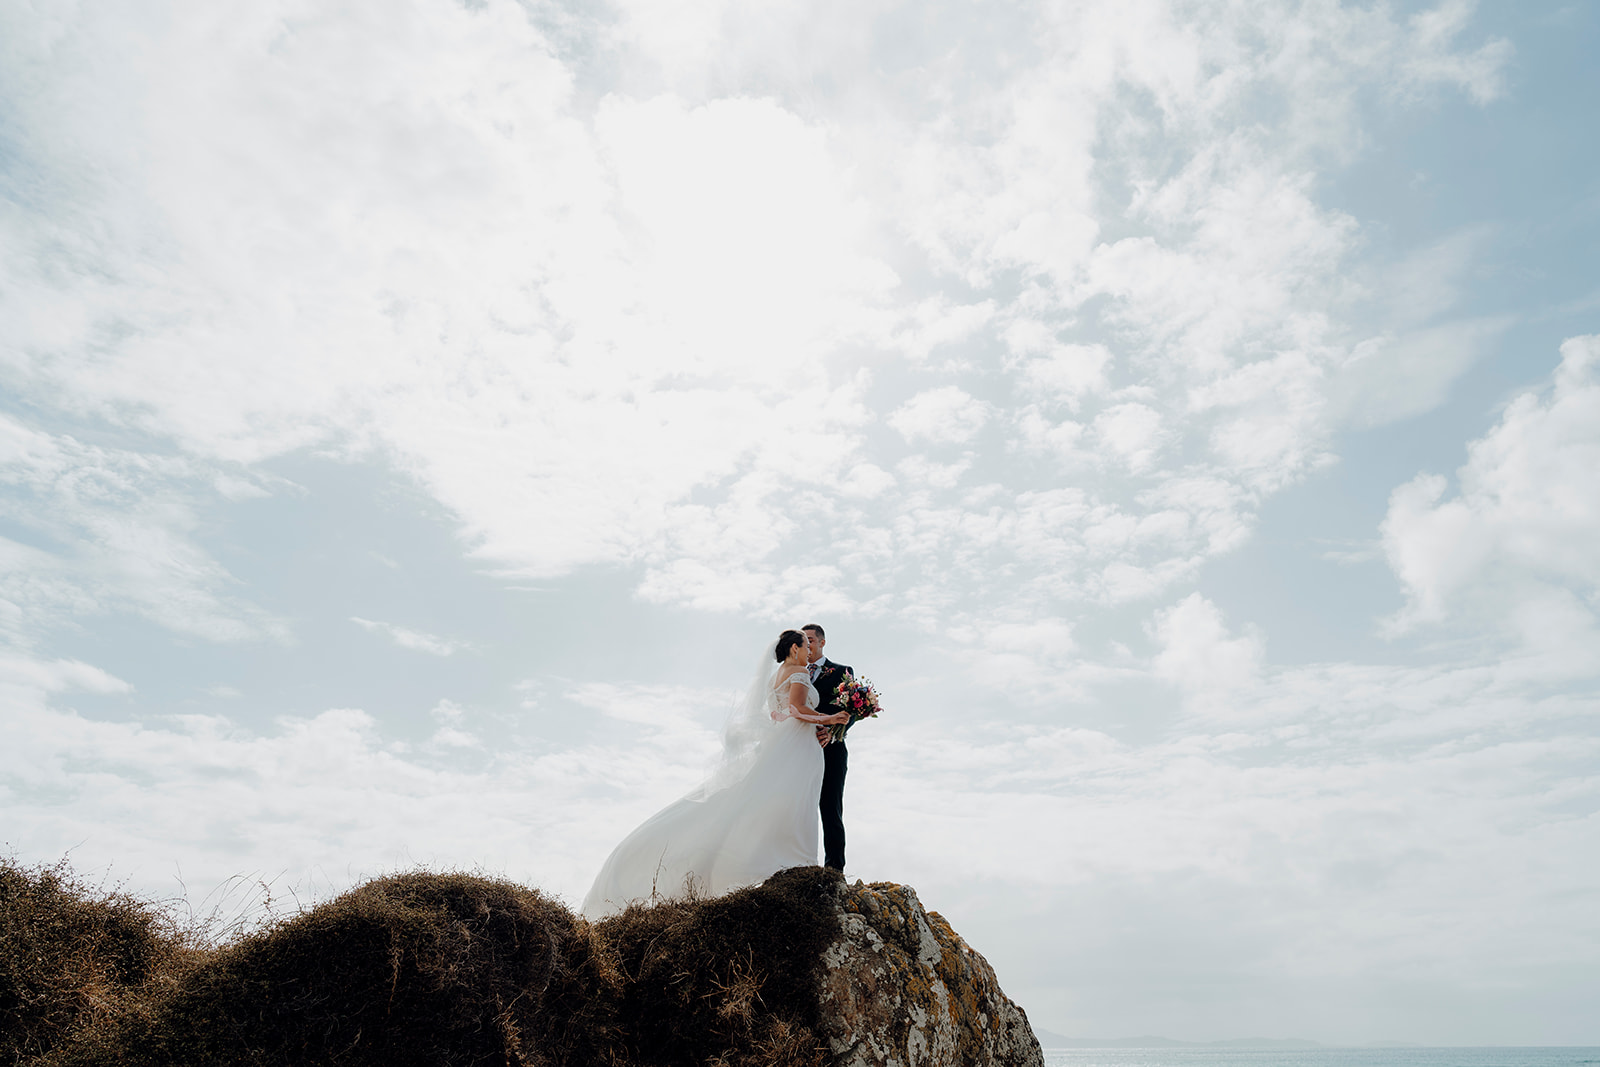 A bride and groom being windswept standing on cliffs during a wedding photoshoot by waikato photographer haley adele photography